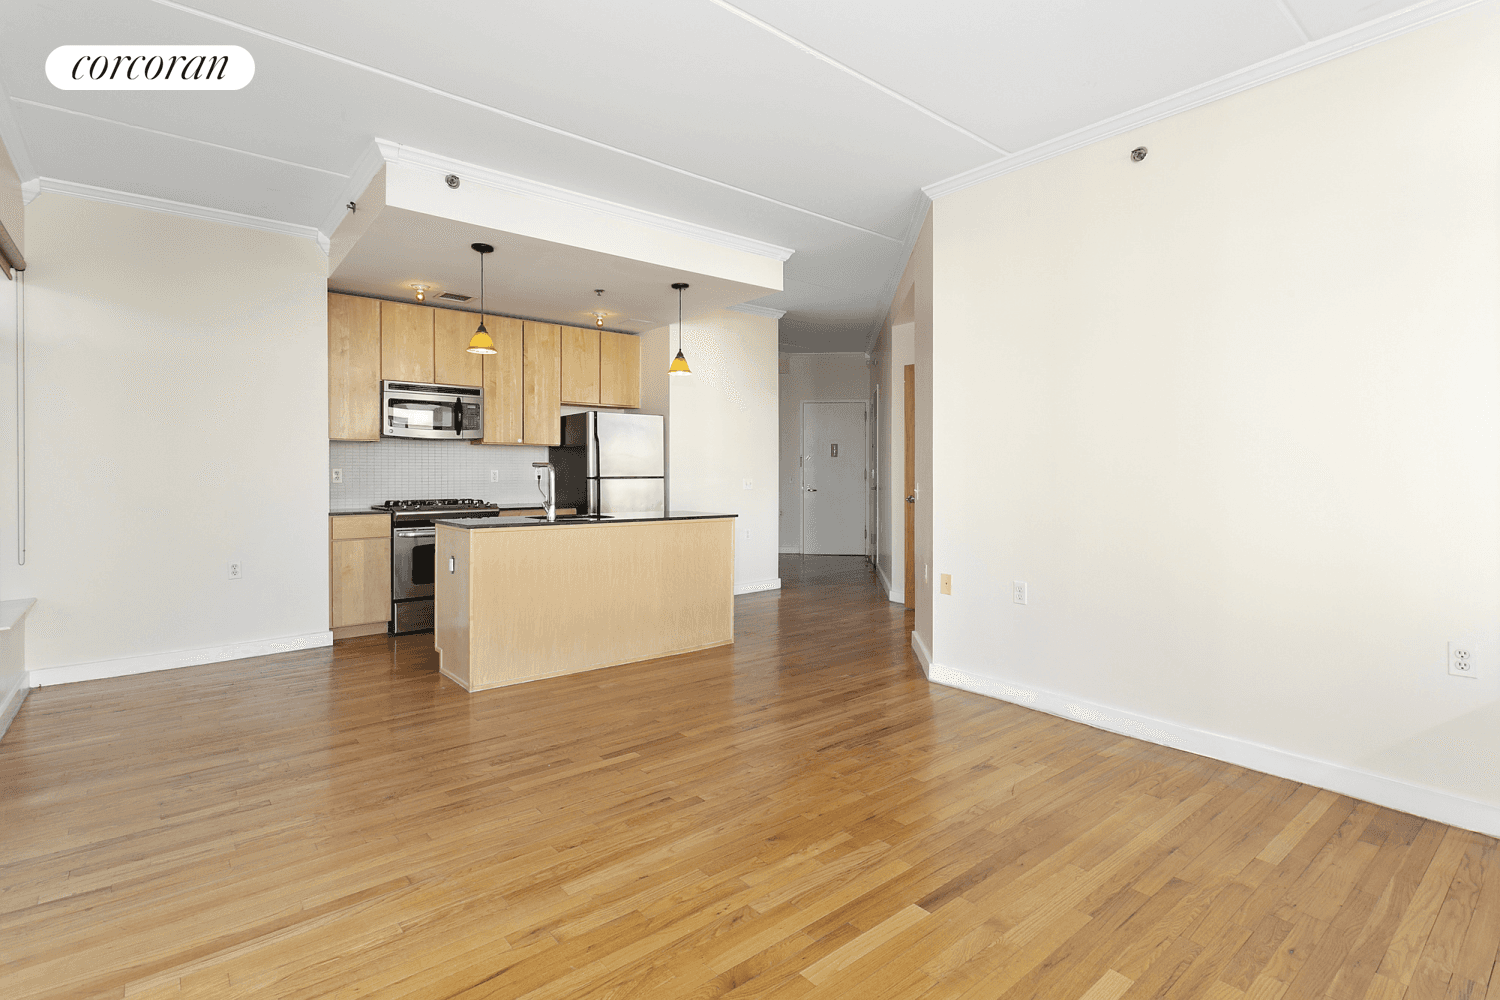 892 Bergen Street is a sleek 10 story contemporary condo located on the border of bustling Crown Heights and Prospect Heights, affording you a location convenient to transportation and some ...